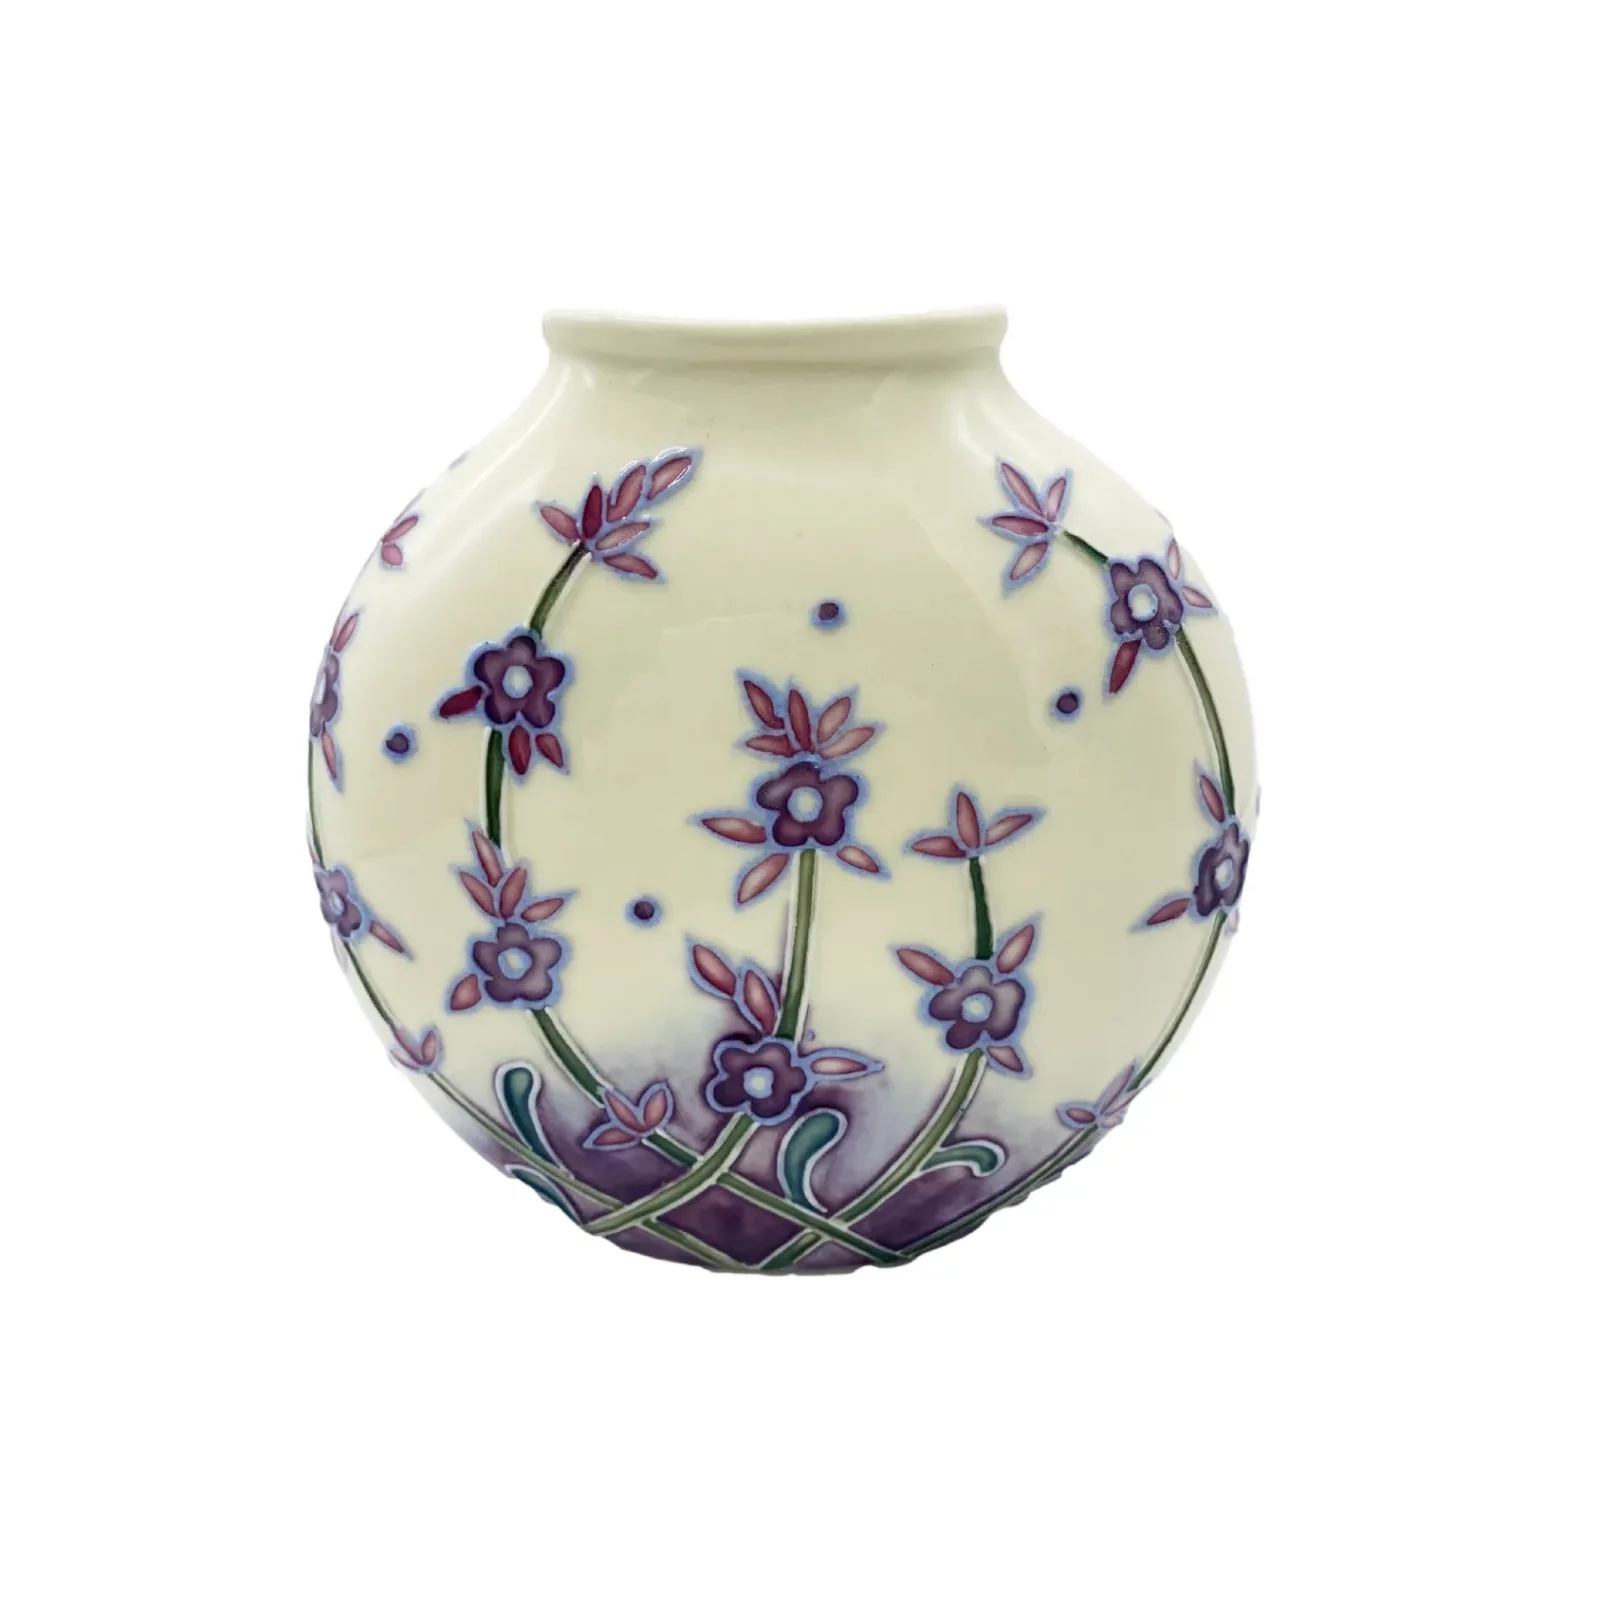 small round and flat white vase with lavender flower around, delicate presentation